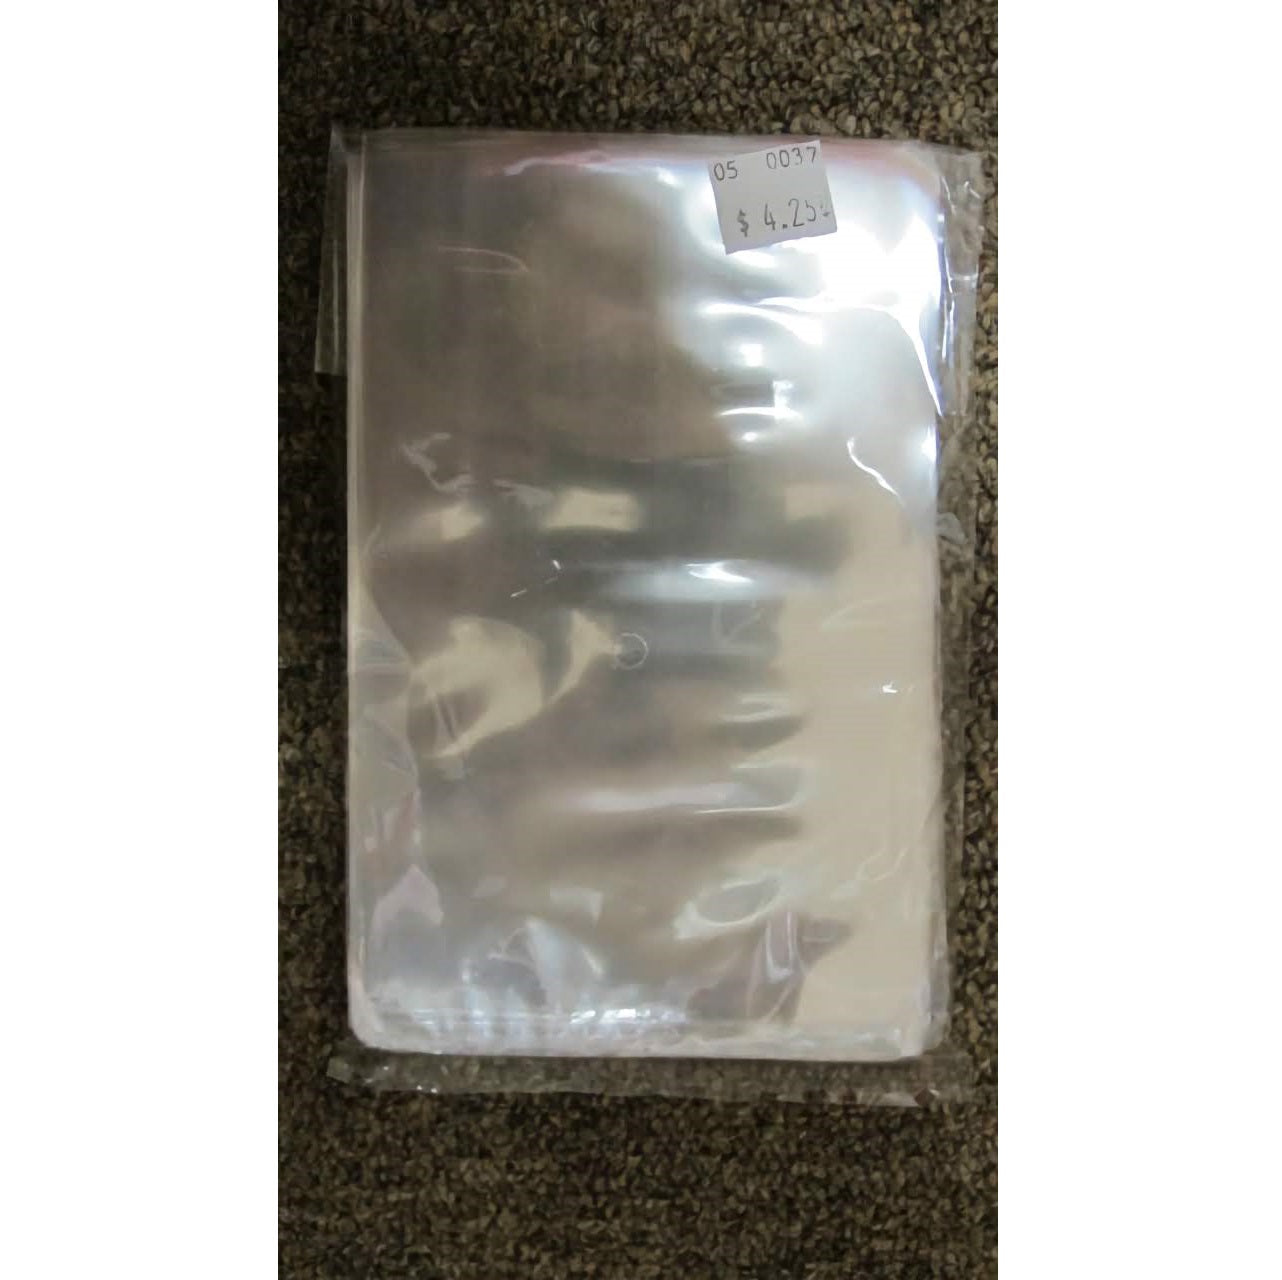 This image shows a package of 100 clear cello bags, sized 4 x 6 inches, on a brown carpeted surface. The packaging gives a glimpse of the stacked cello bags inside, ideal for packaging treats and candies.